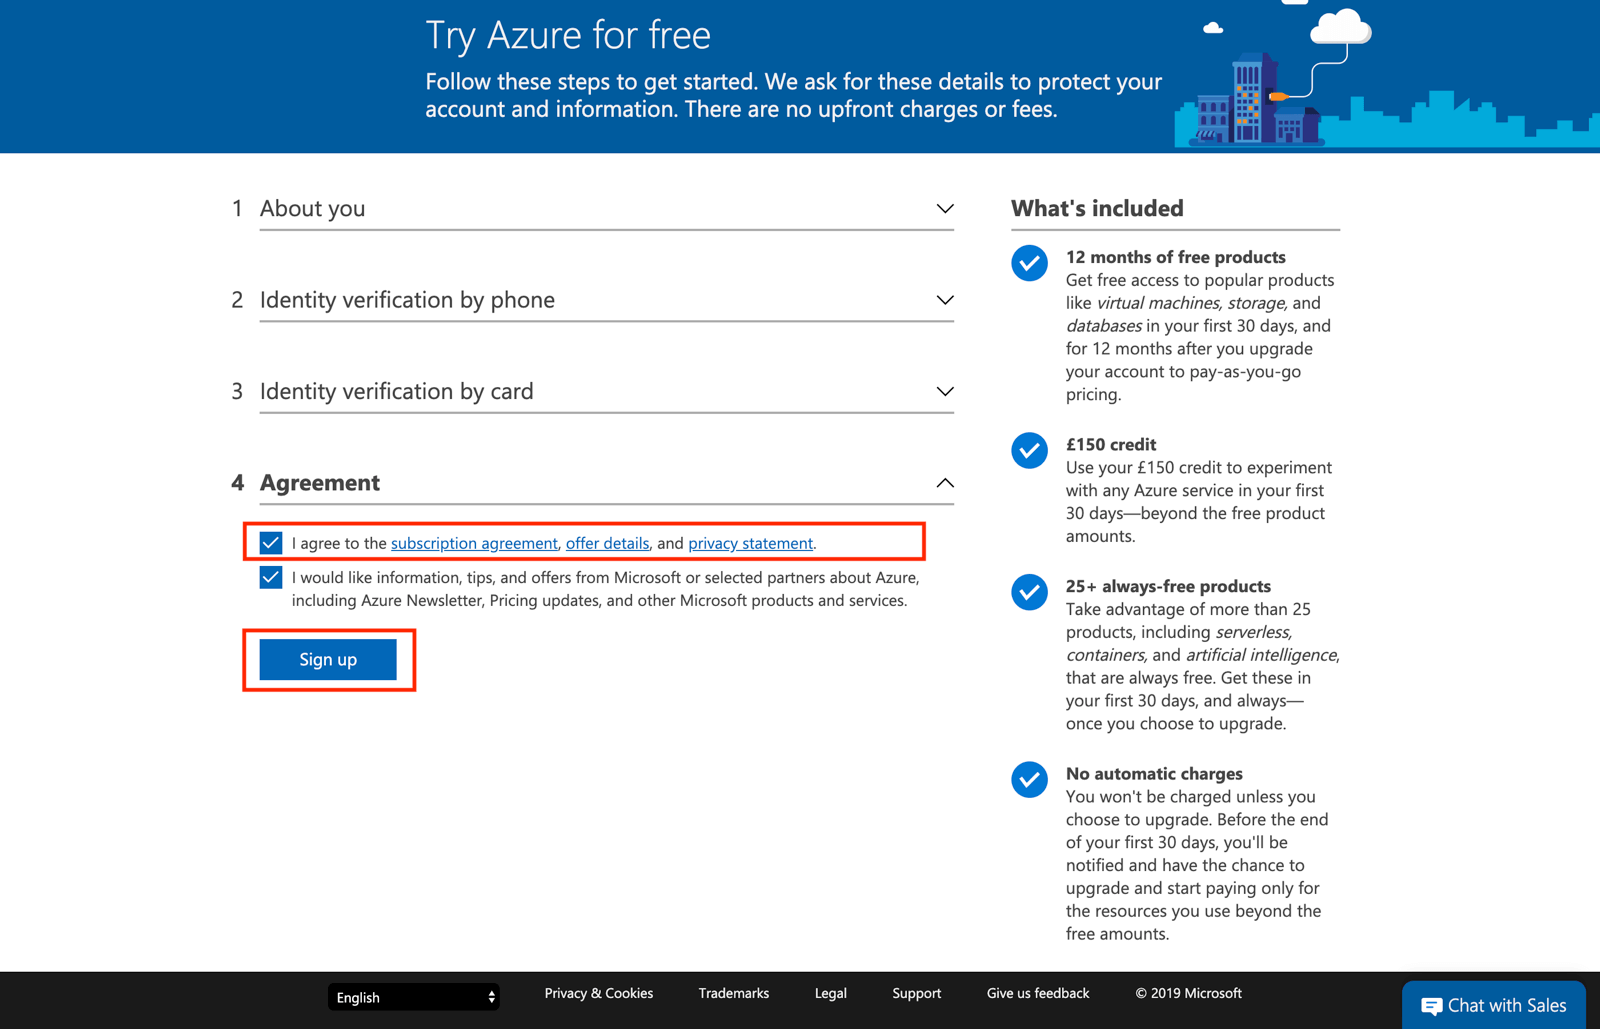 Confirm to agree to the Microsoft Azure terms.